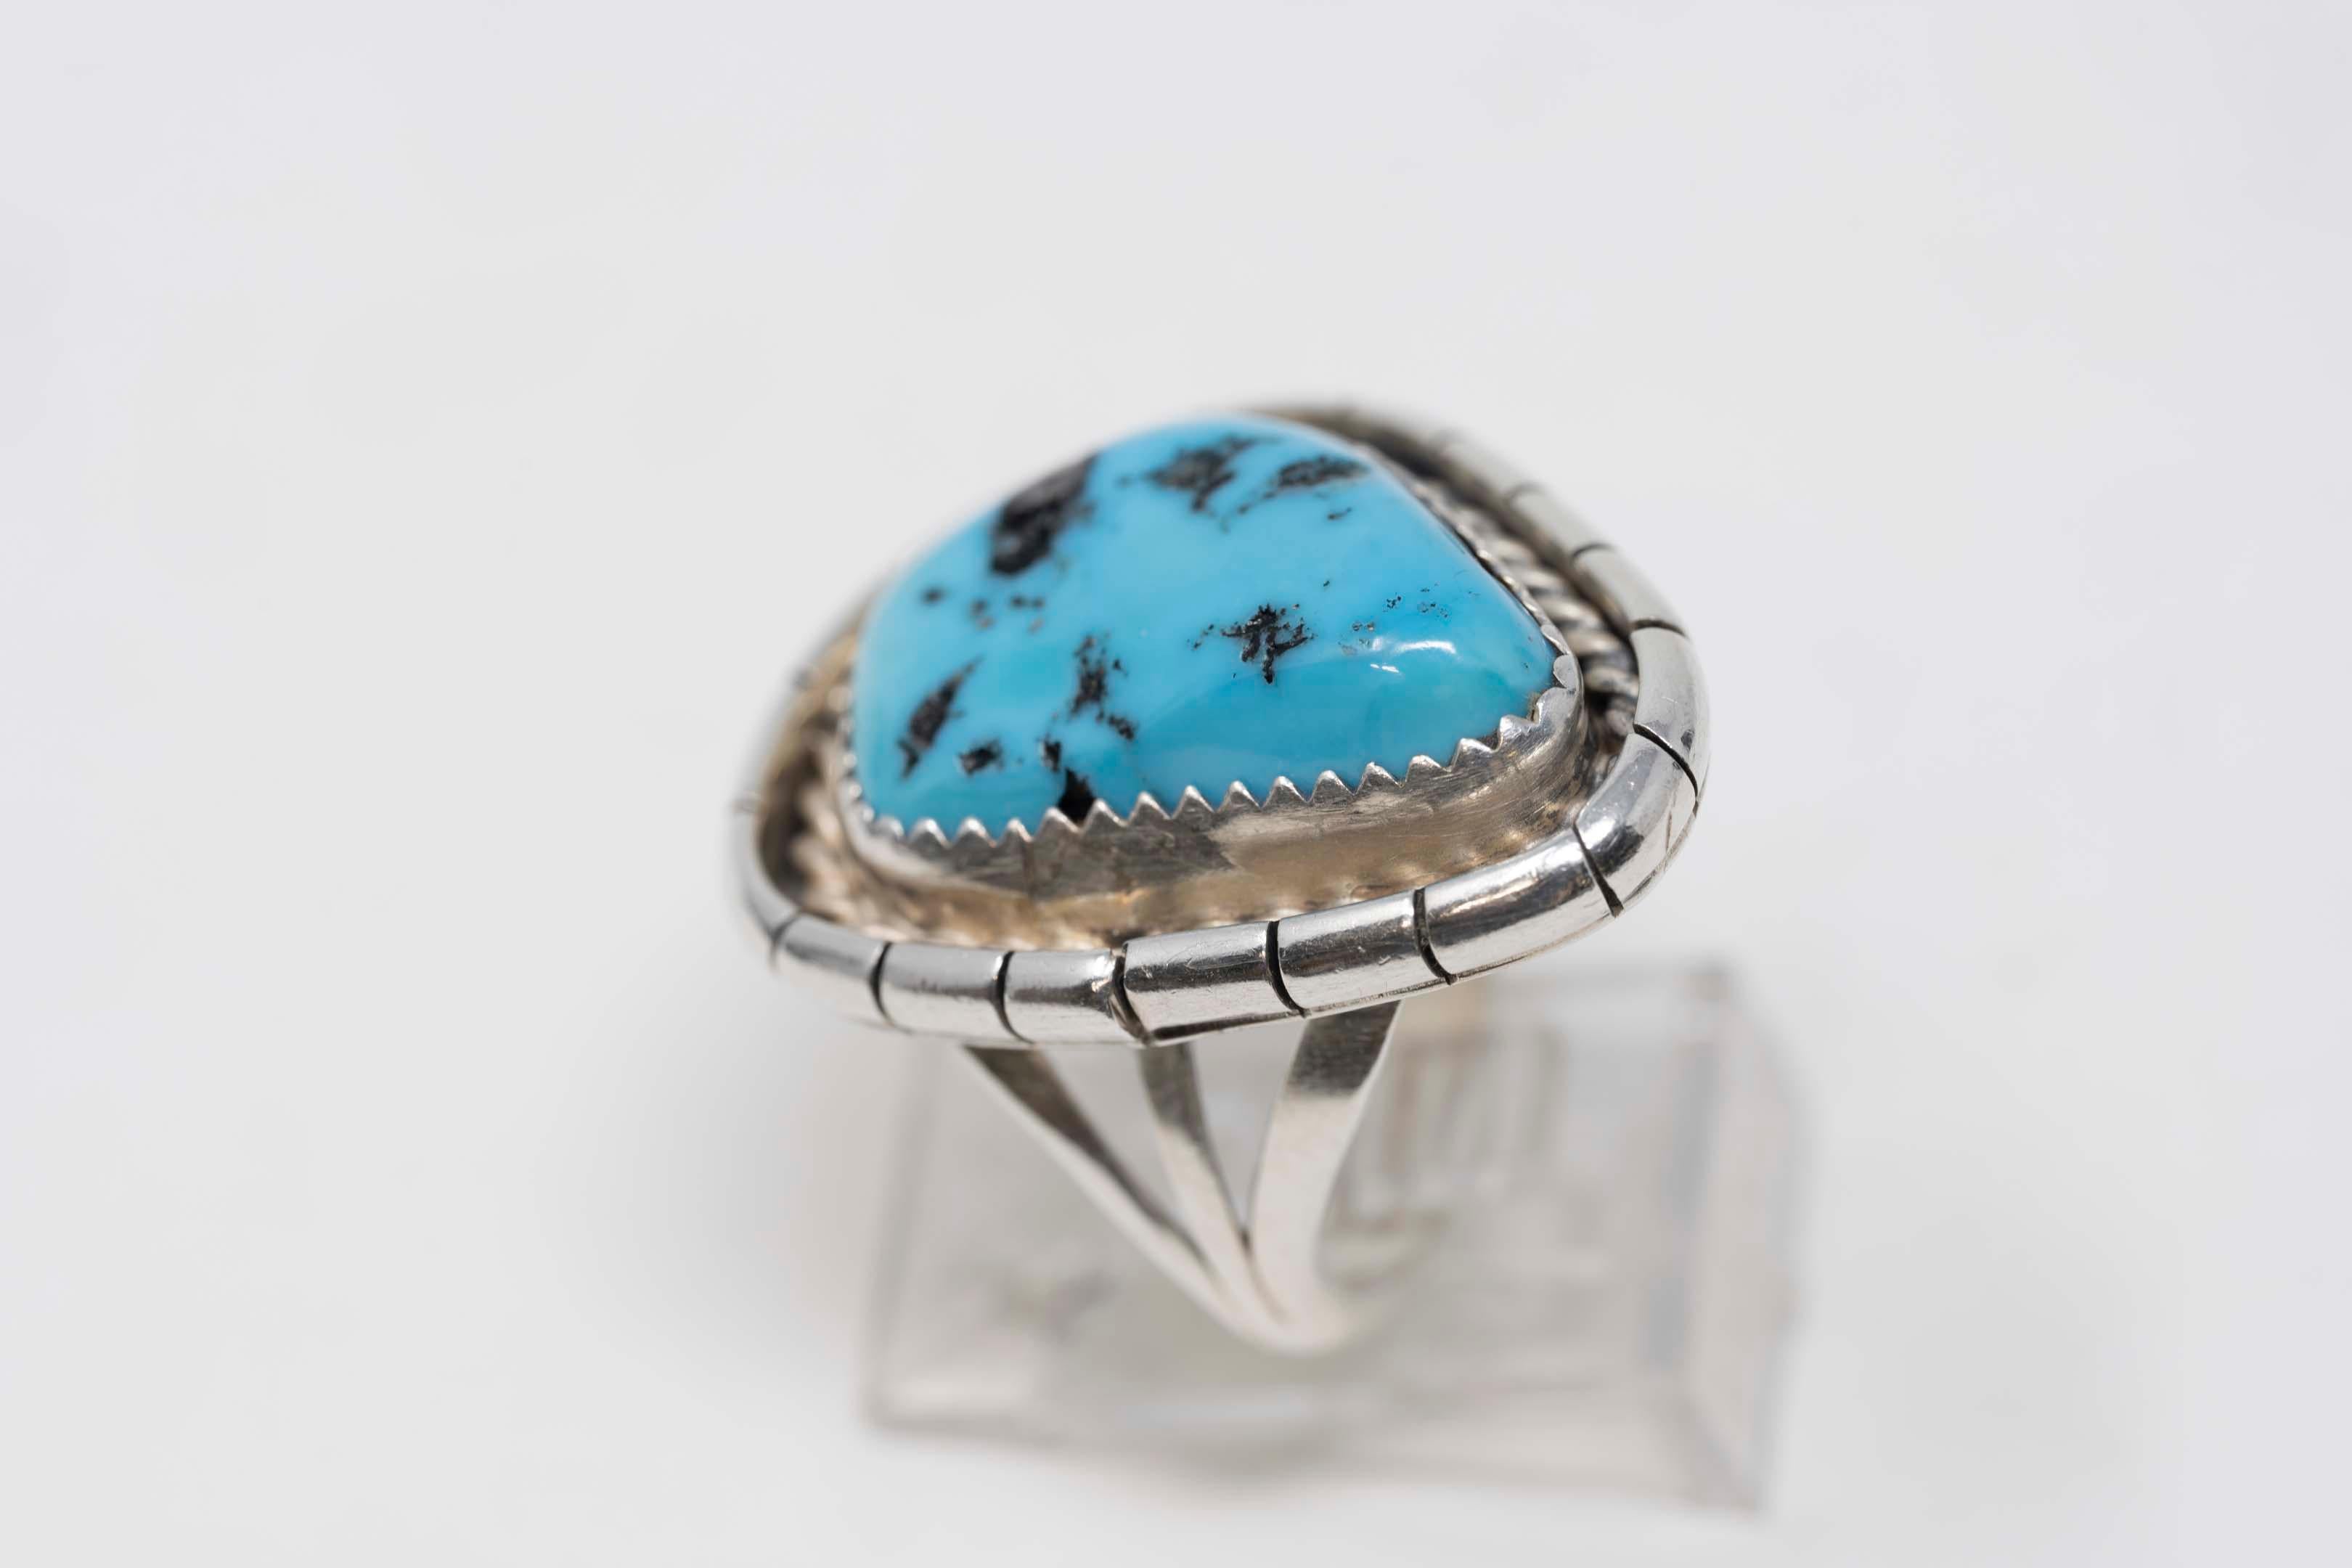 Native American Navajo Ben Yazzie sterling silver ring and turquoise stone size 7 1/2. Signed inside, top measures 27mm x 22mm, turquoise measures 21mm x 14mm. In good condition.
